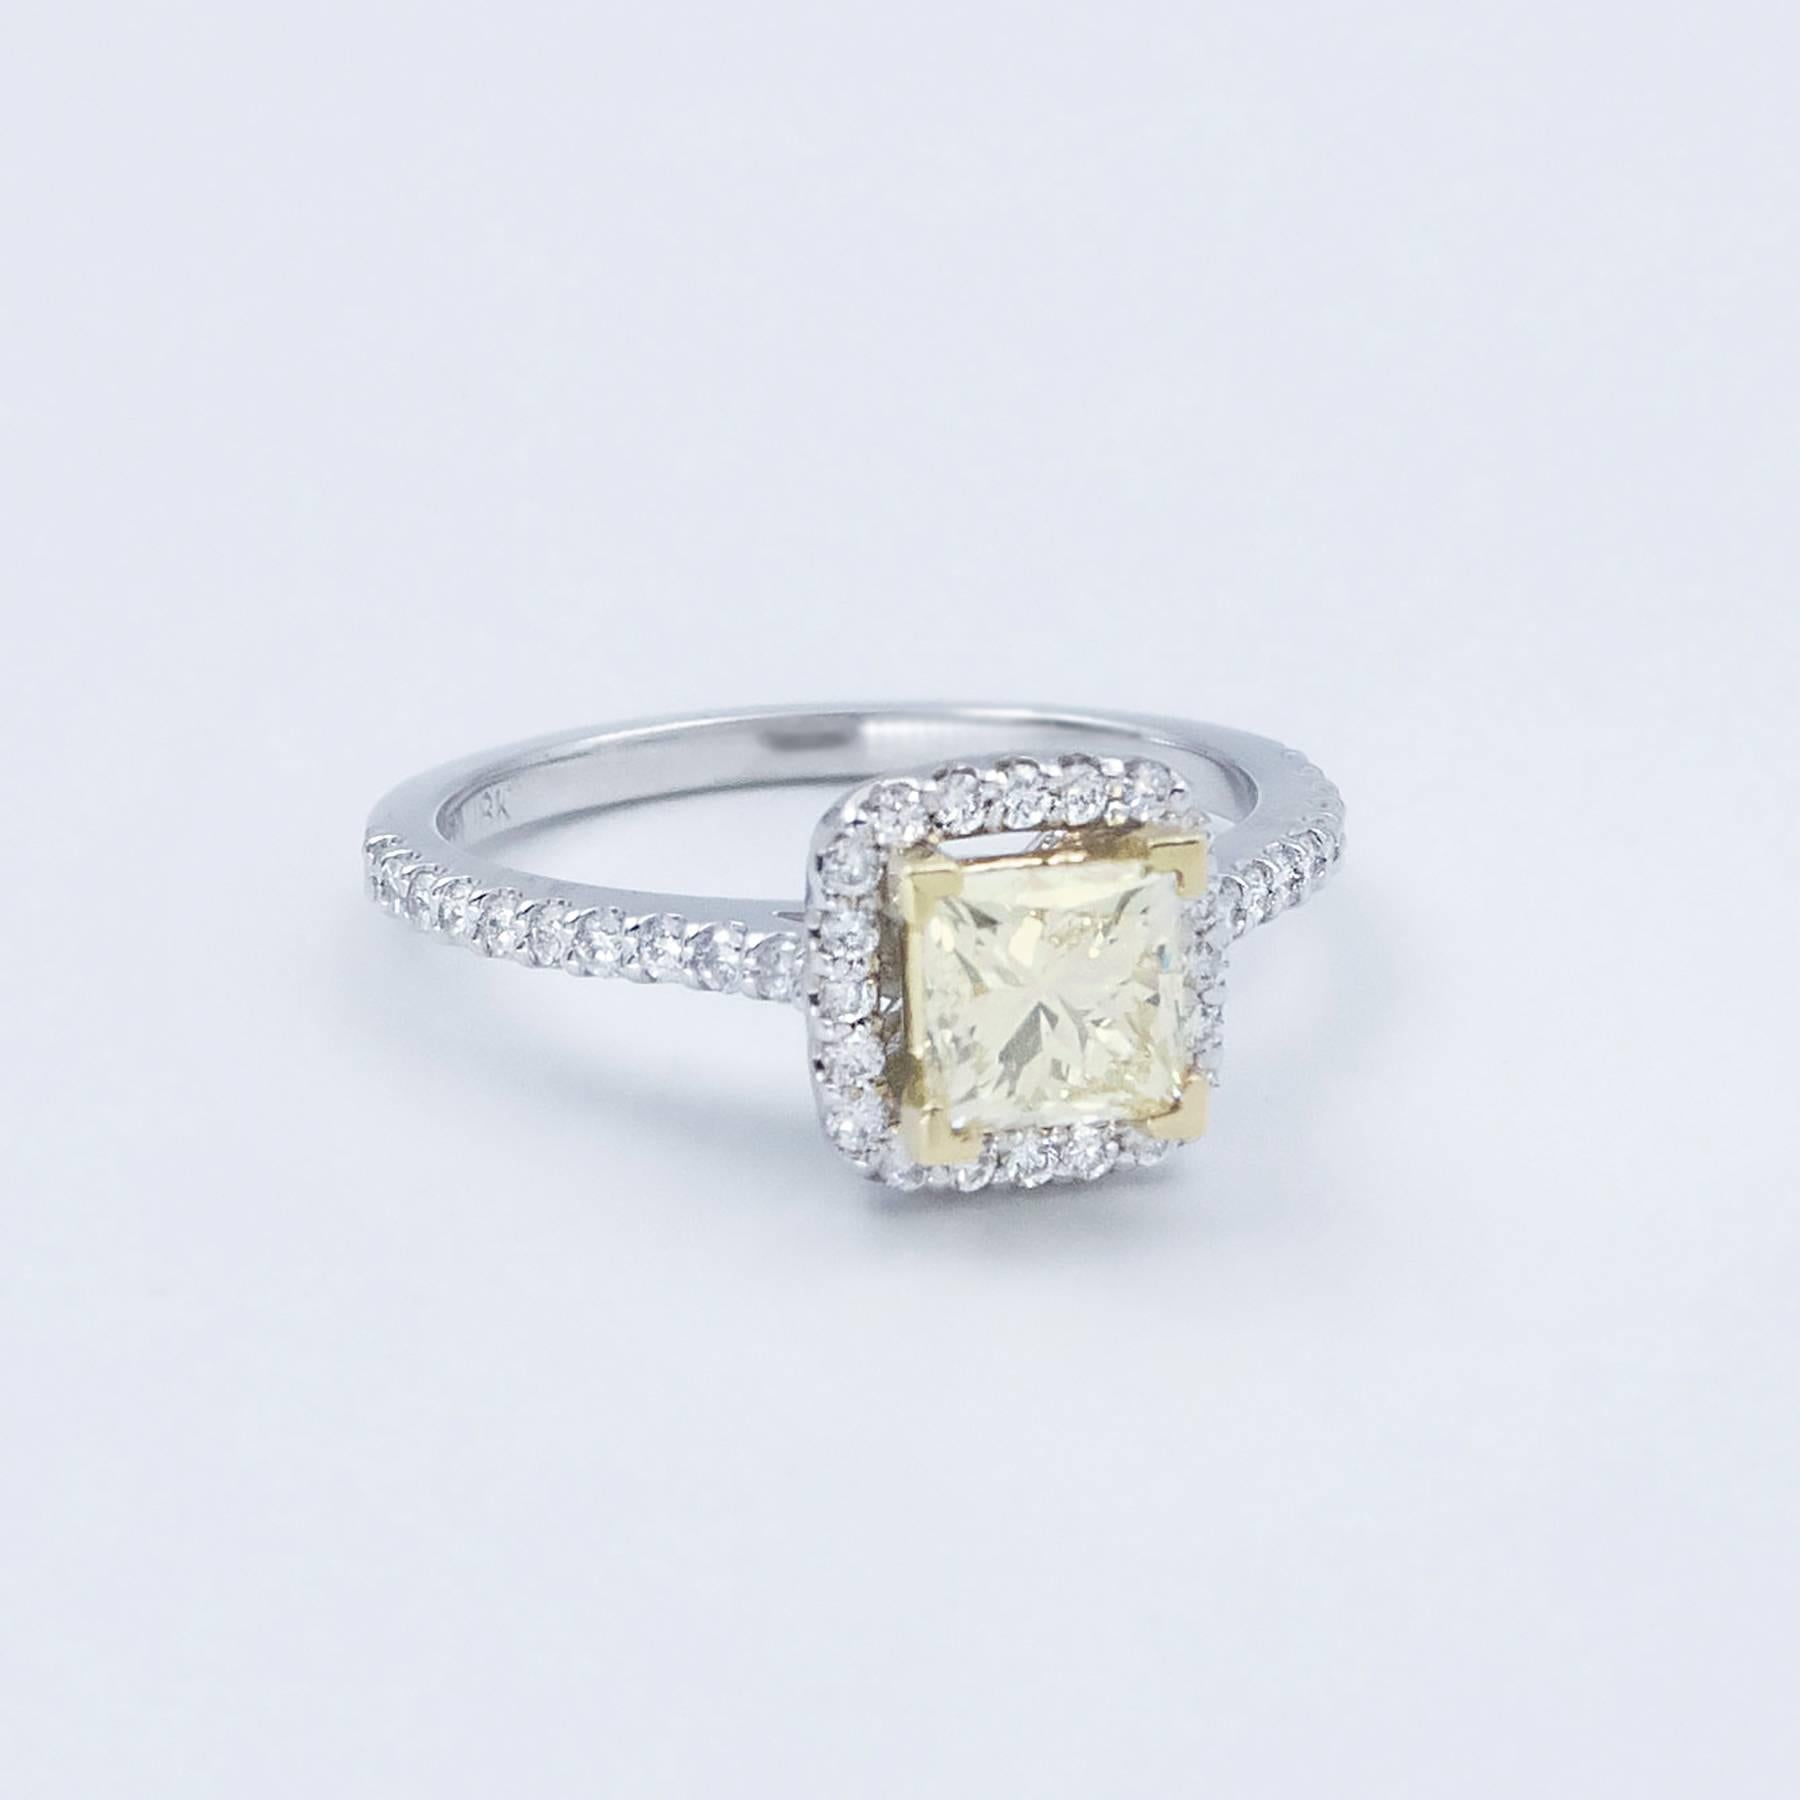 The natural Fancy Light Yellow Princess Cut central Diamond is rated VS2 and weighs 1.02 carats.  Surrounding the center stone are 40 Round, bead set Brilliant Cut White Diamonds that continue to run down the sides of the shank. The small Diamonds